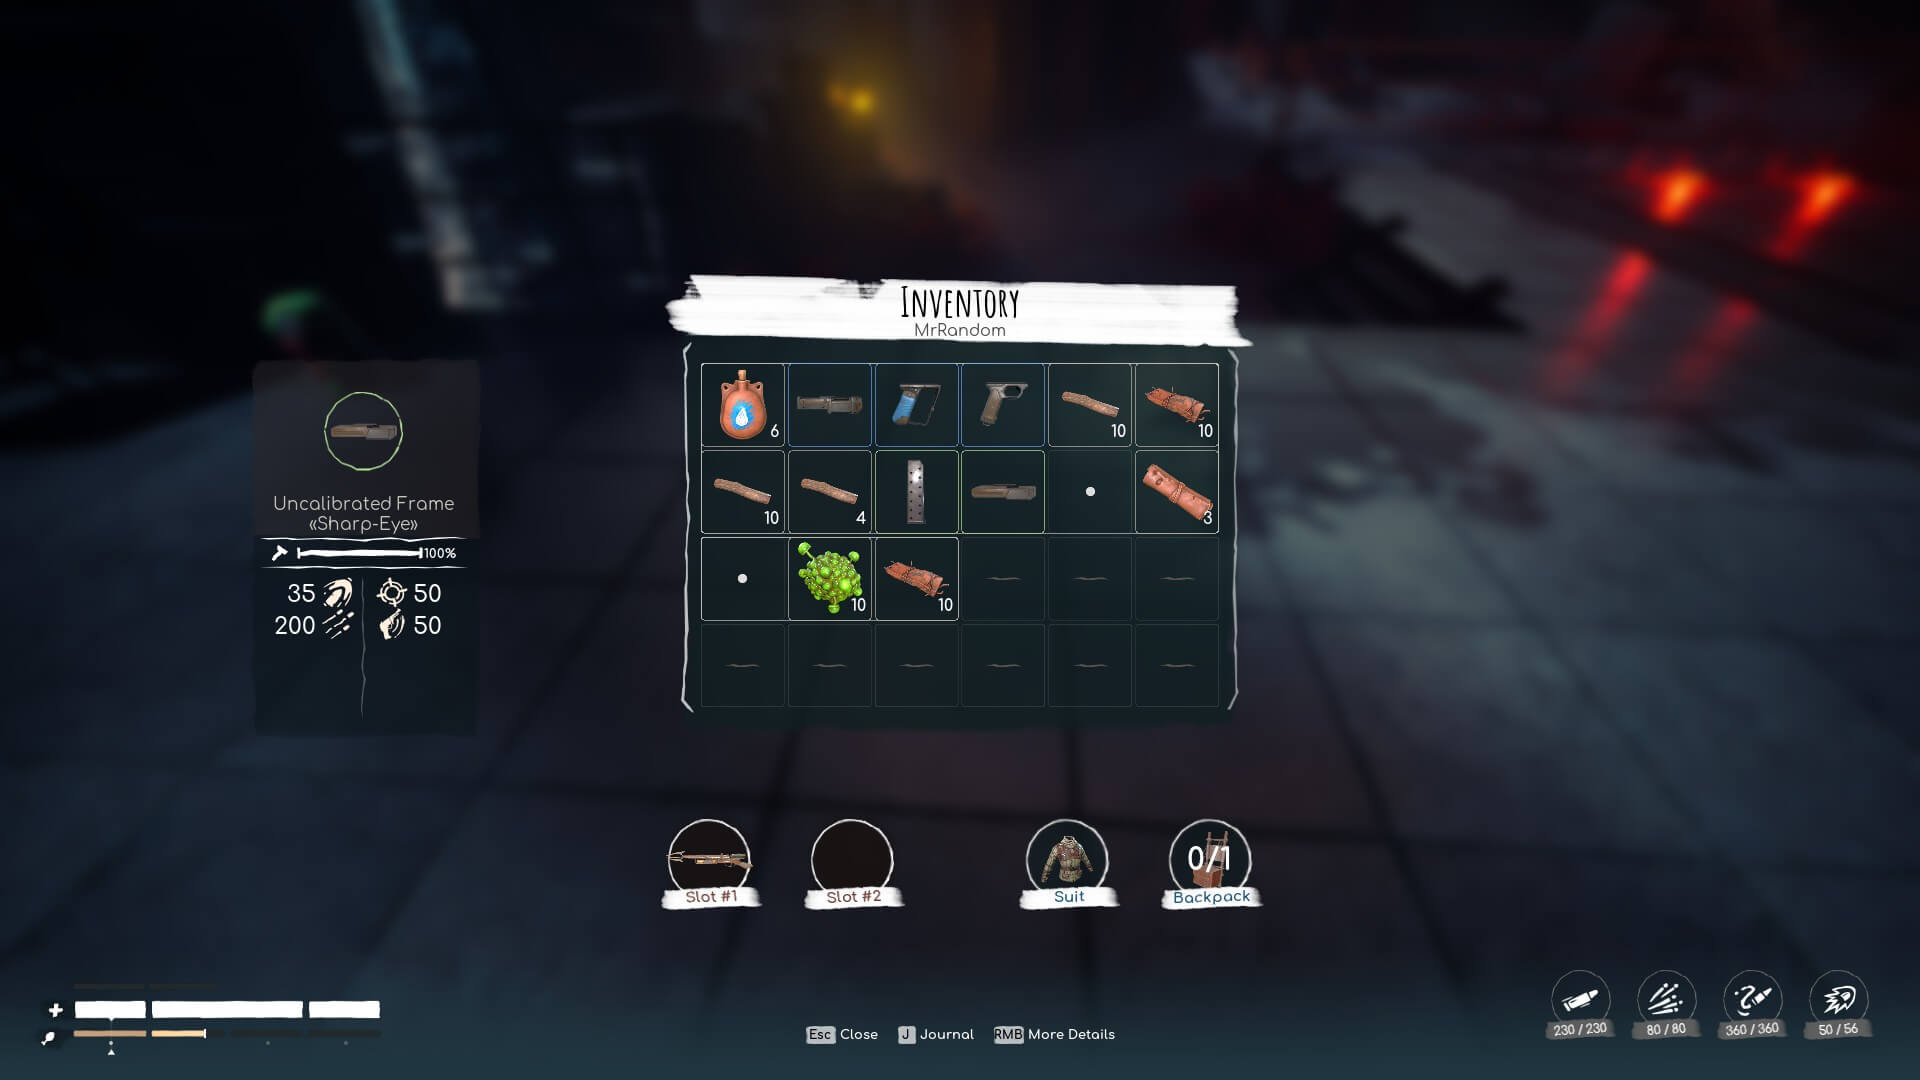 The main inventory in Voidtrain. The gun module "Uncalibrated Frame" is highlighted, offering stat increases.